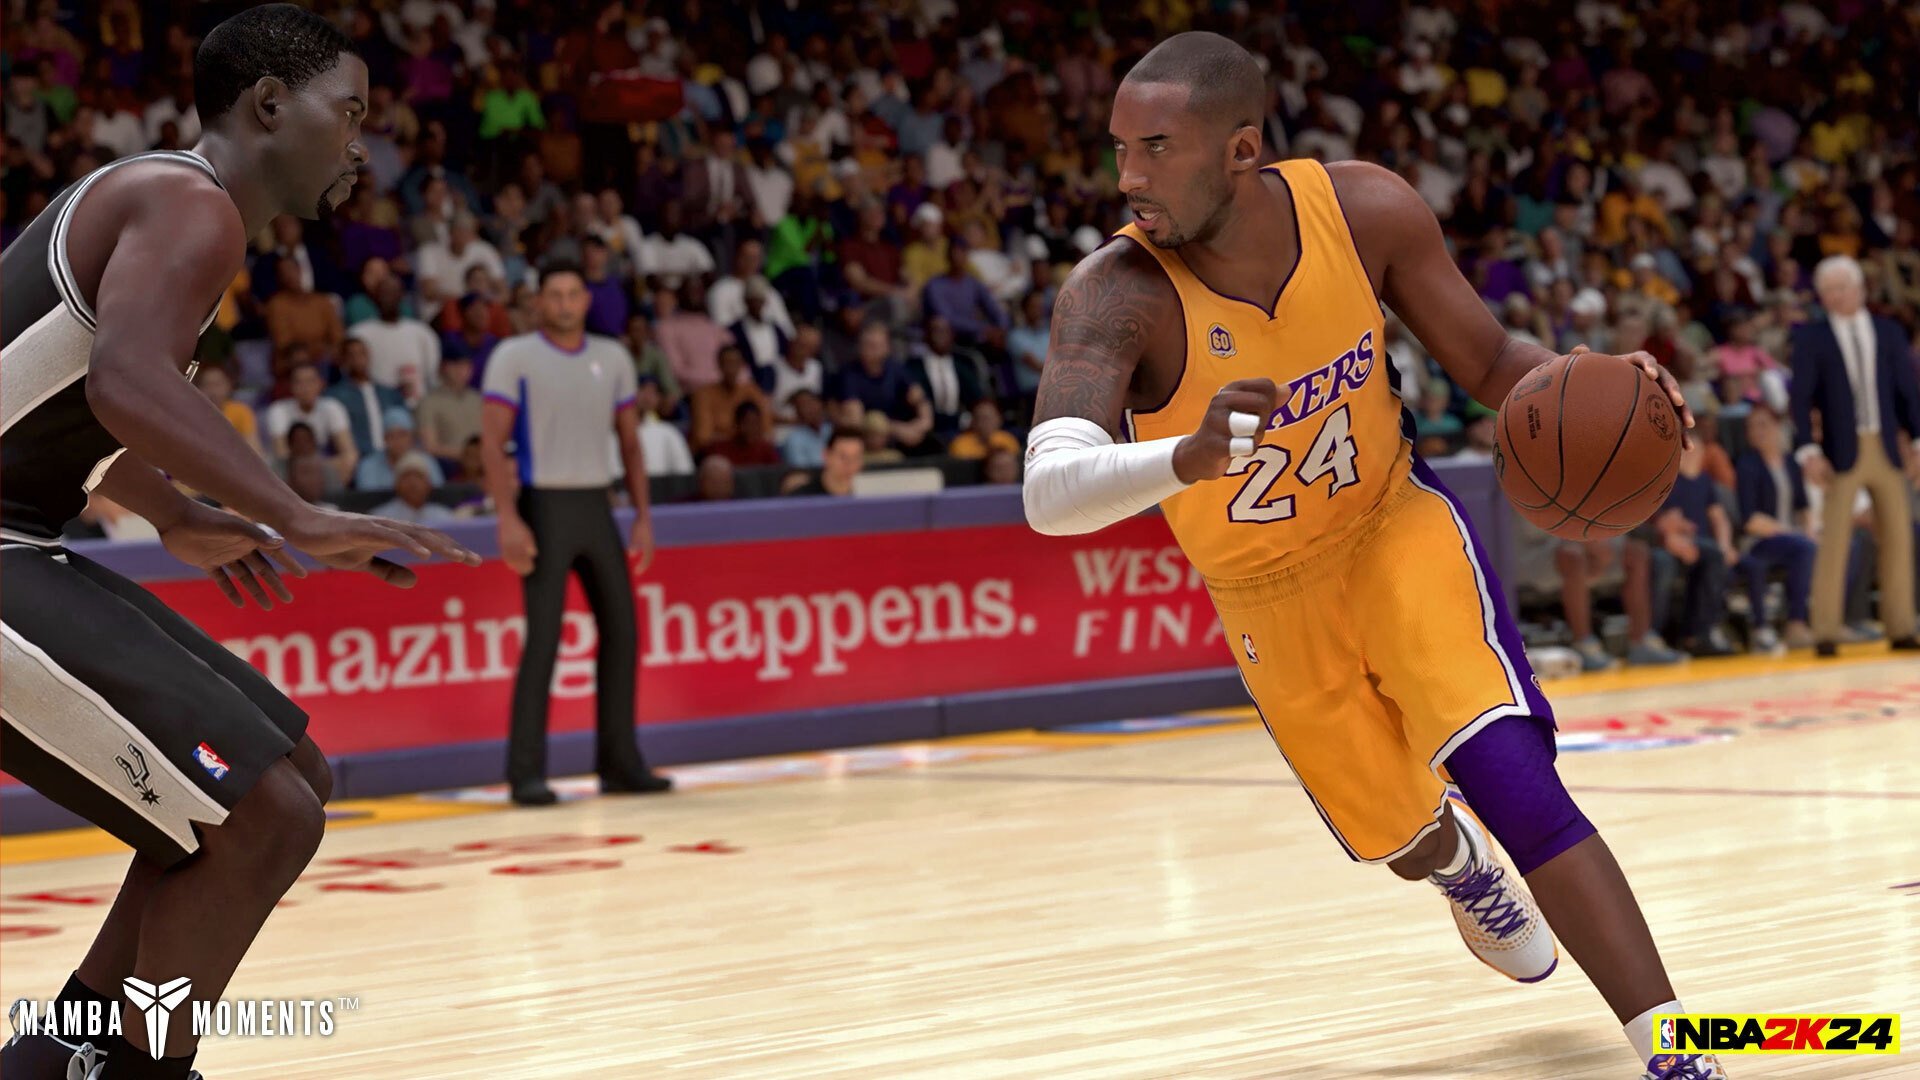 You can step into the shoes of the late, great Kobe Bryant in NBA2K24.